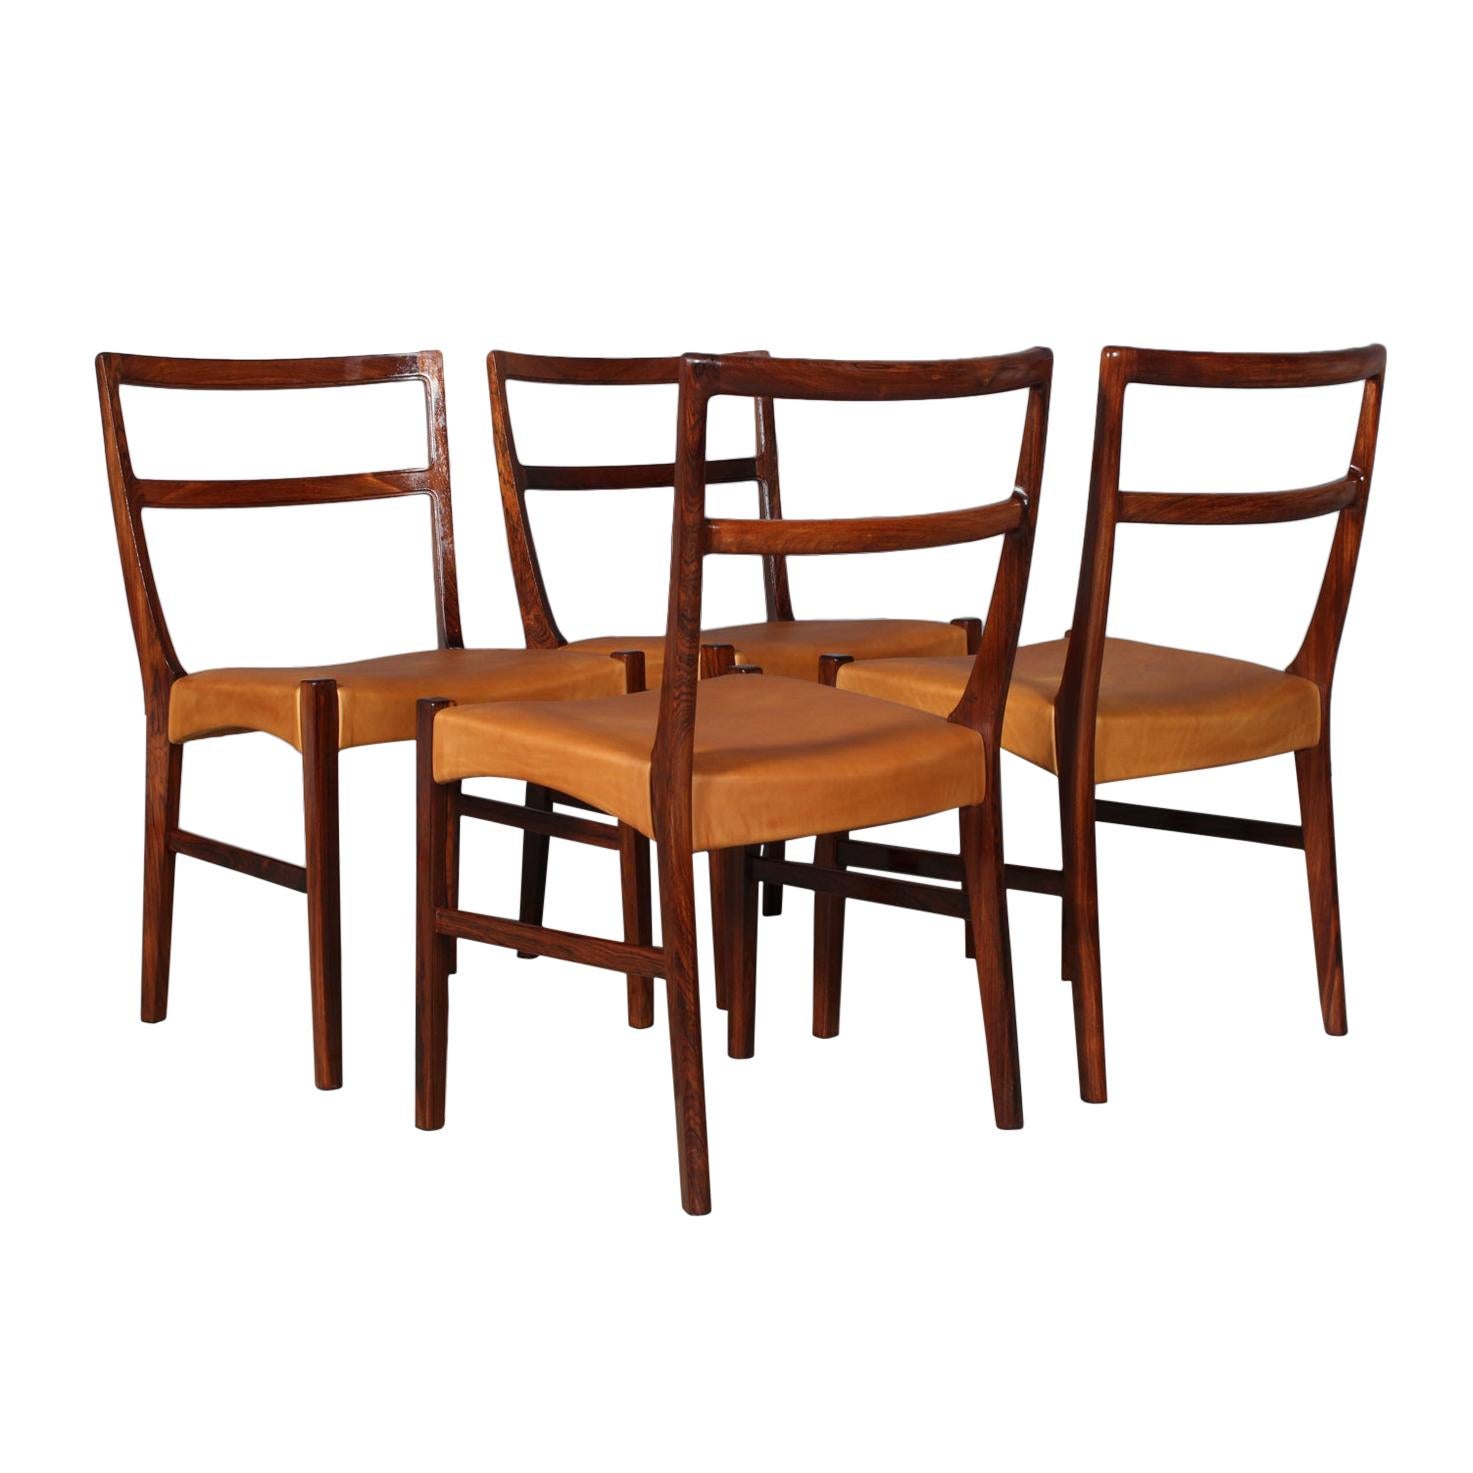 Johannes Andersen four Dining Chairs, Rosewood and Leather Upholstery